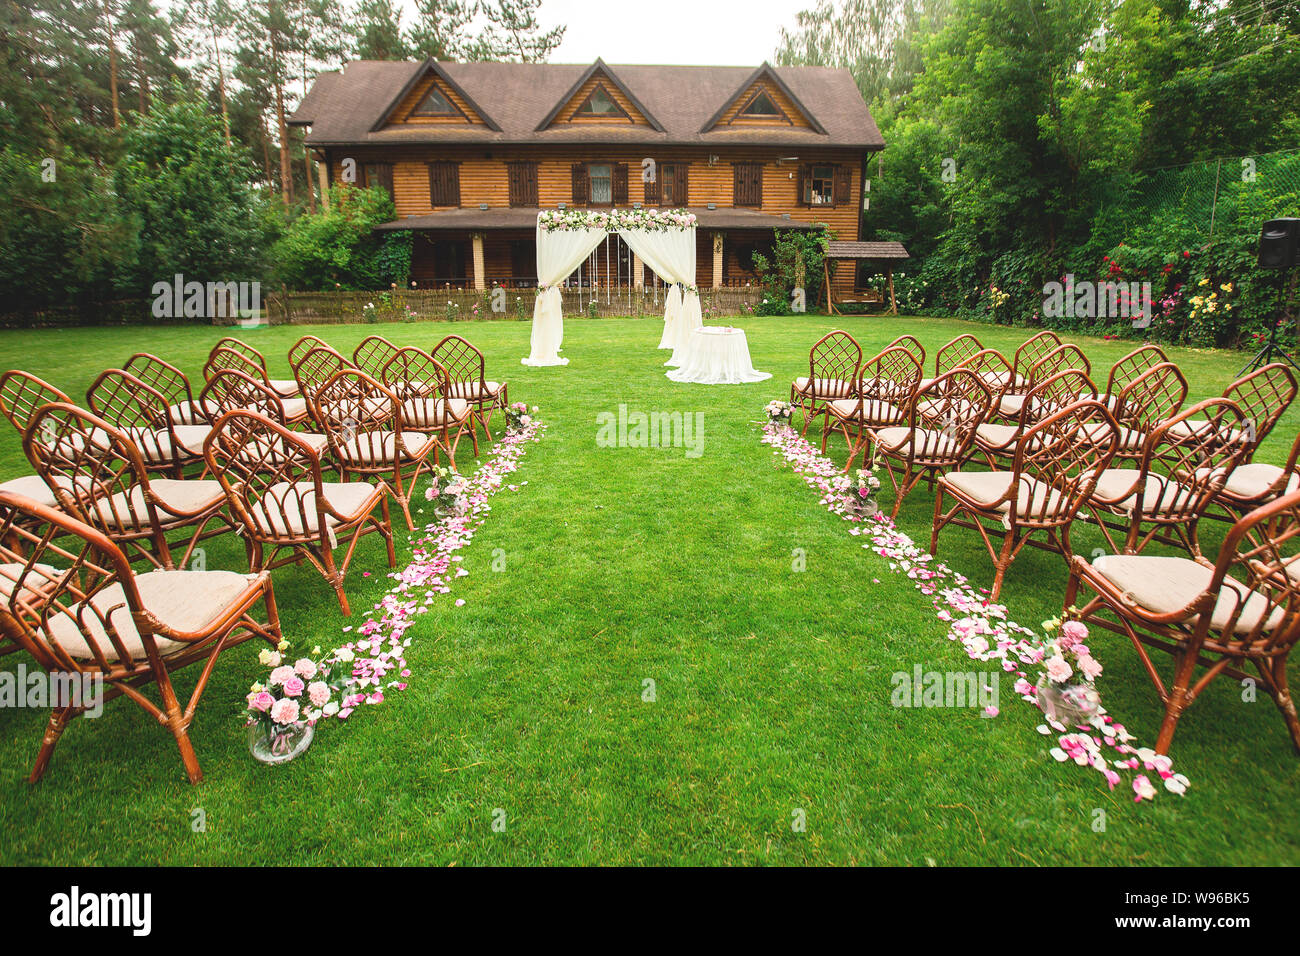 Outdoor wedding ceremony decoration setup. Path with petals, chairs decorated with colorful ribbons, white arch. wedding concept Stock Photo